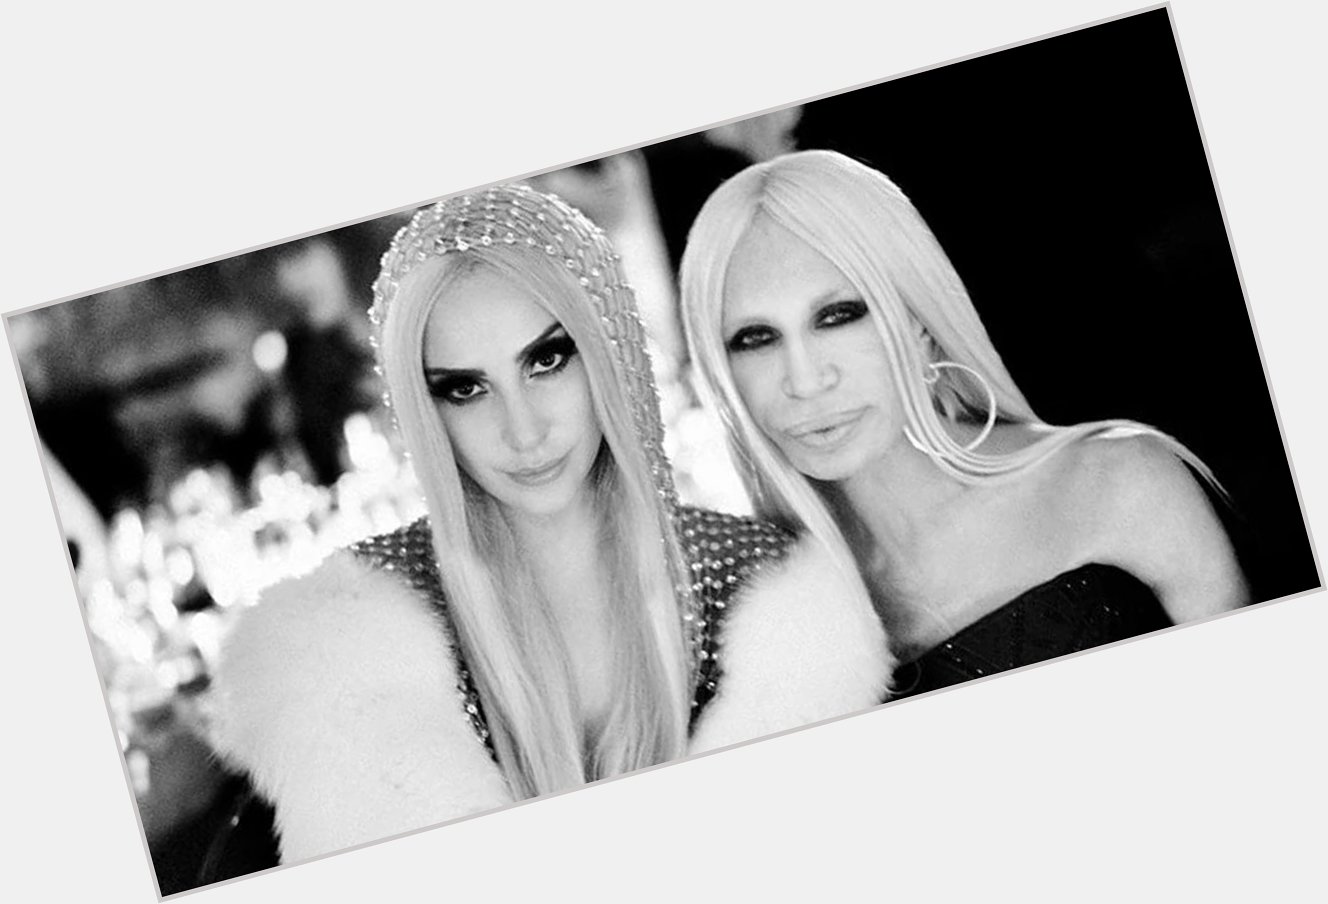 Happy birthday Donatella Versace from Lady Gaga and Monsters. Walk bad and feel good today, it s your day. 